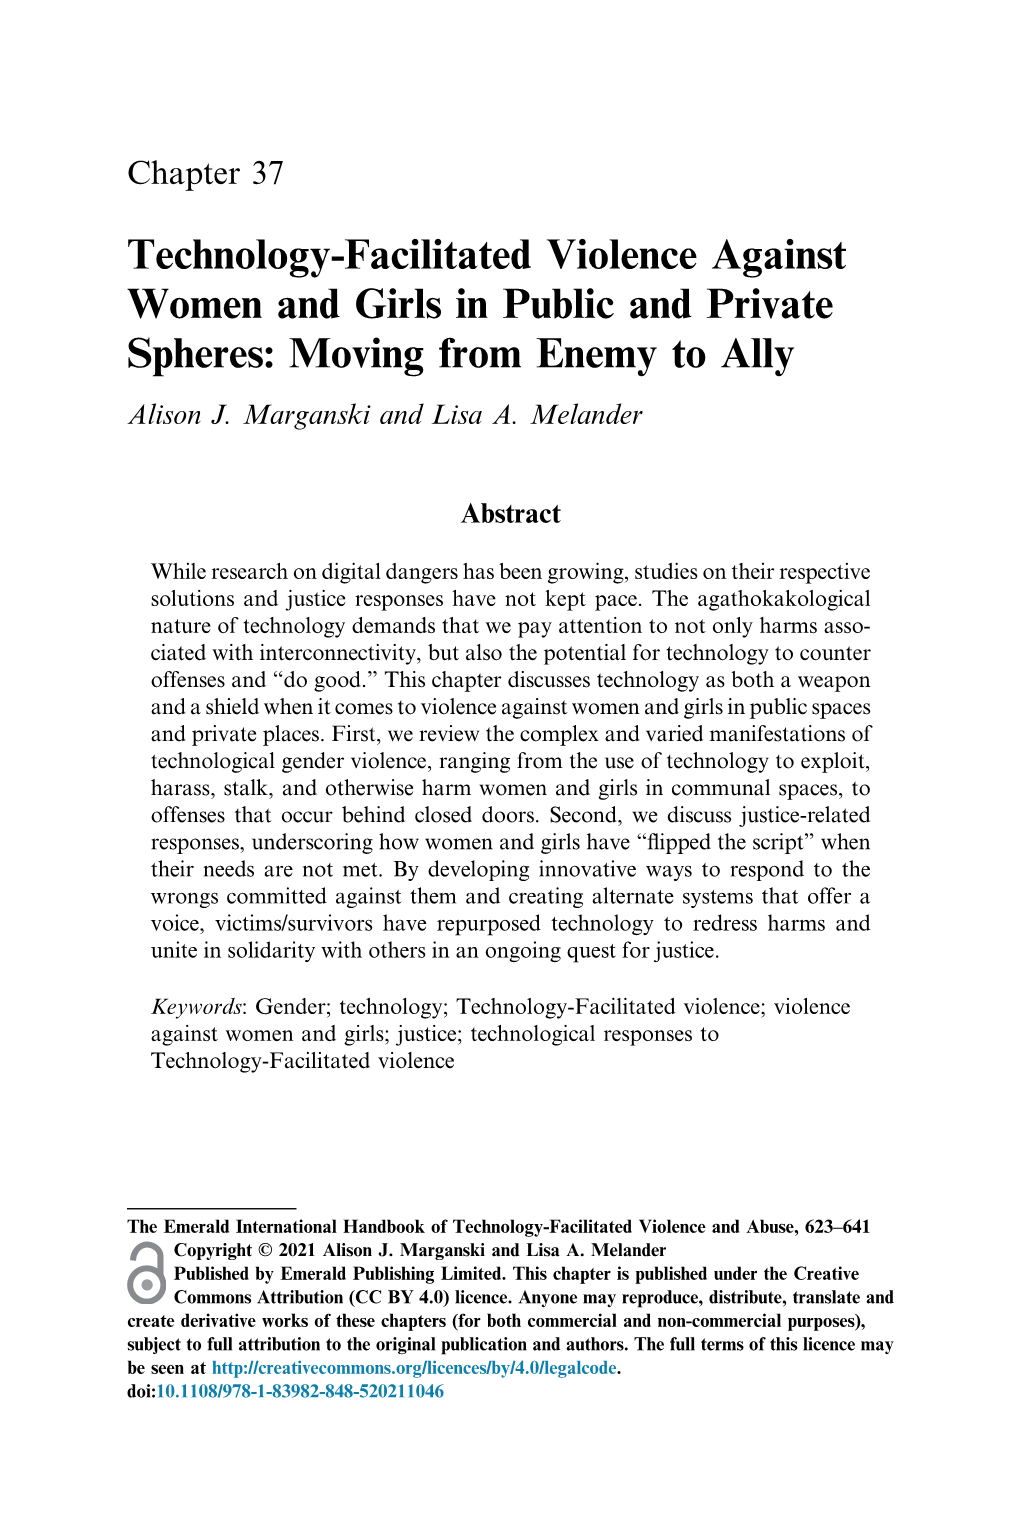 Technology-Facilitated Violence Against Women and Girls in Public and Private Spheres: Moving from Enemy to Ally Alison J